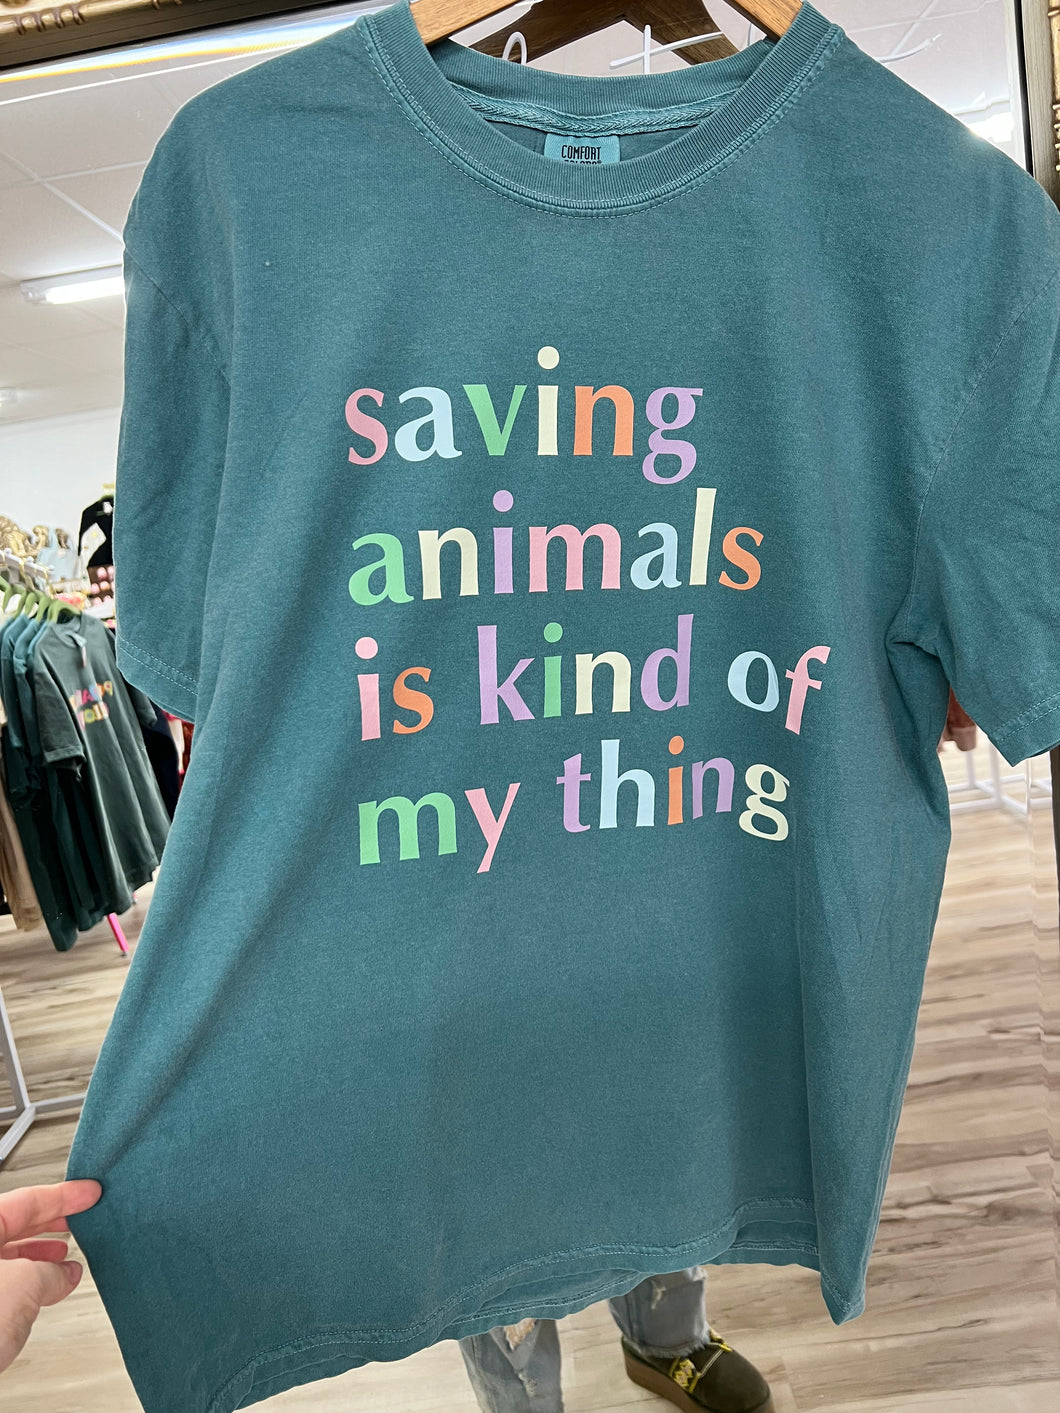 Saving animals is kind of my thing tee